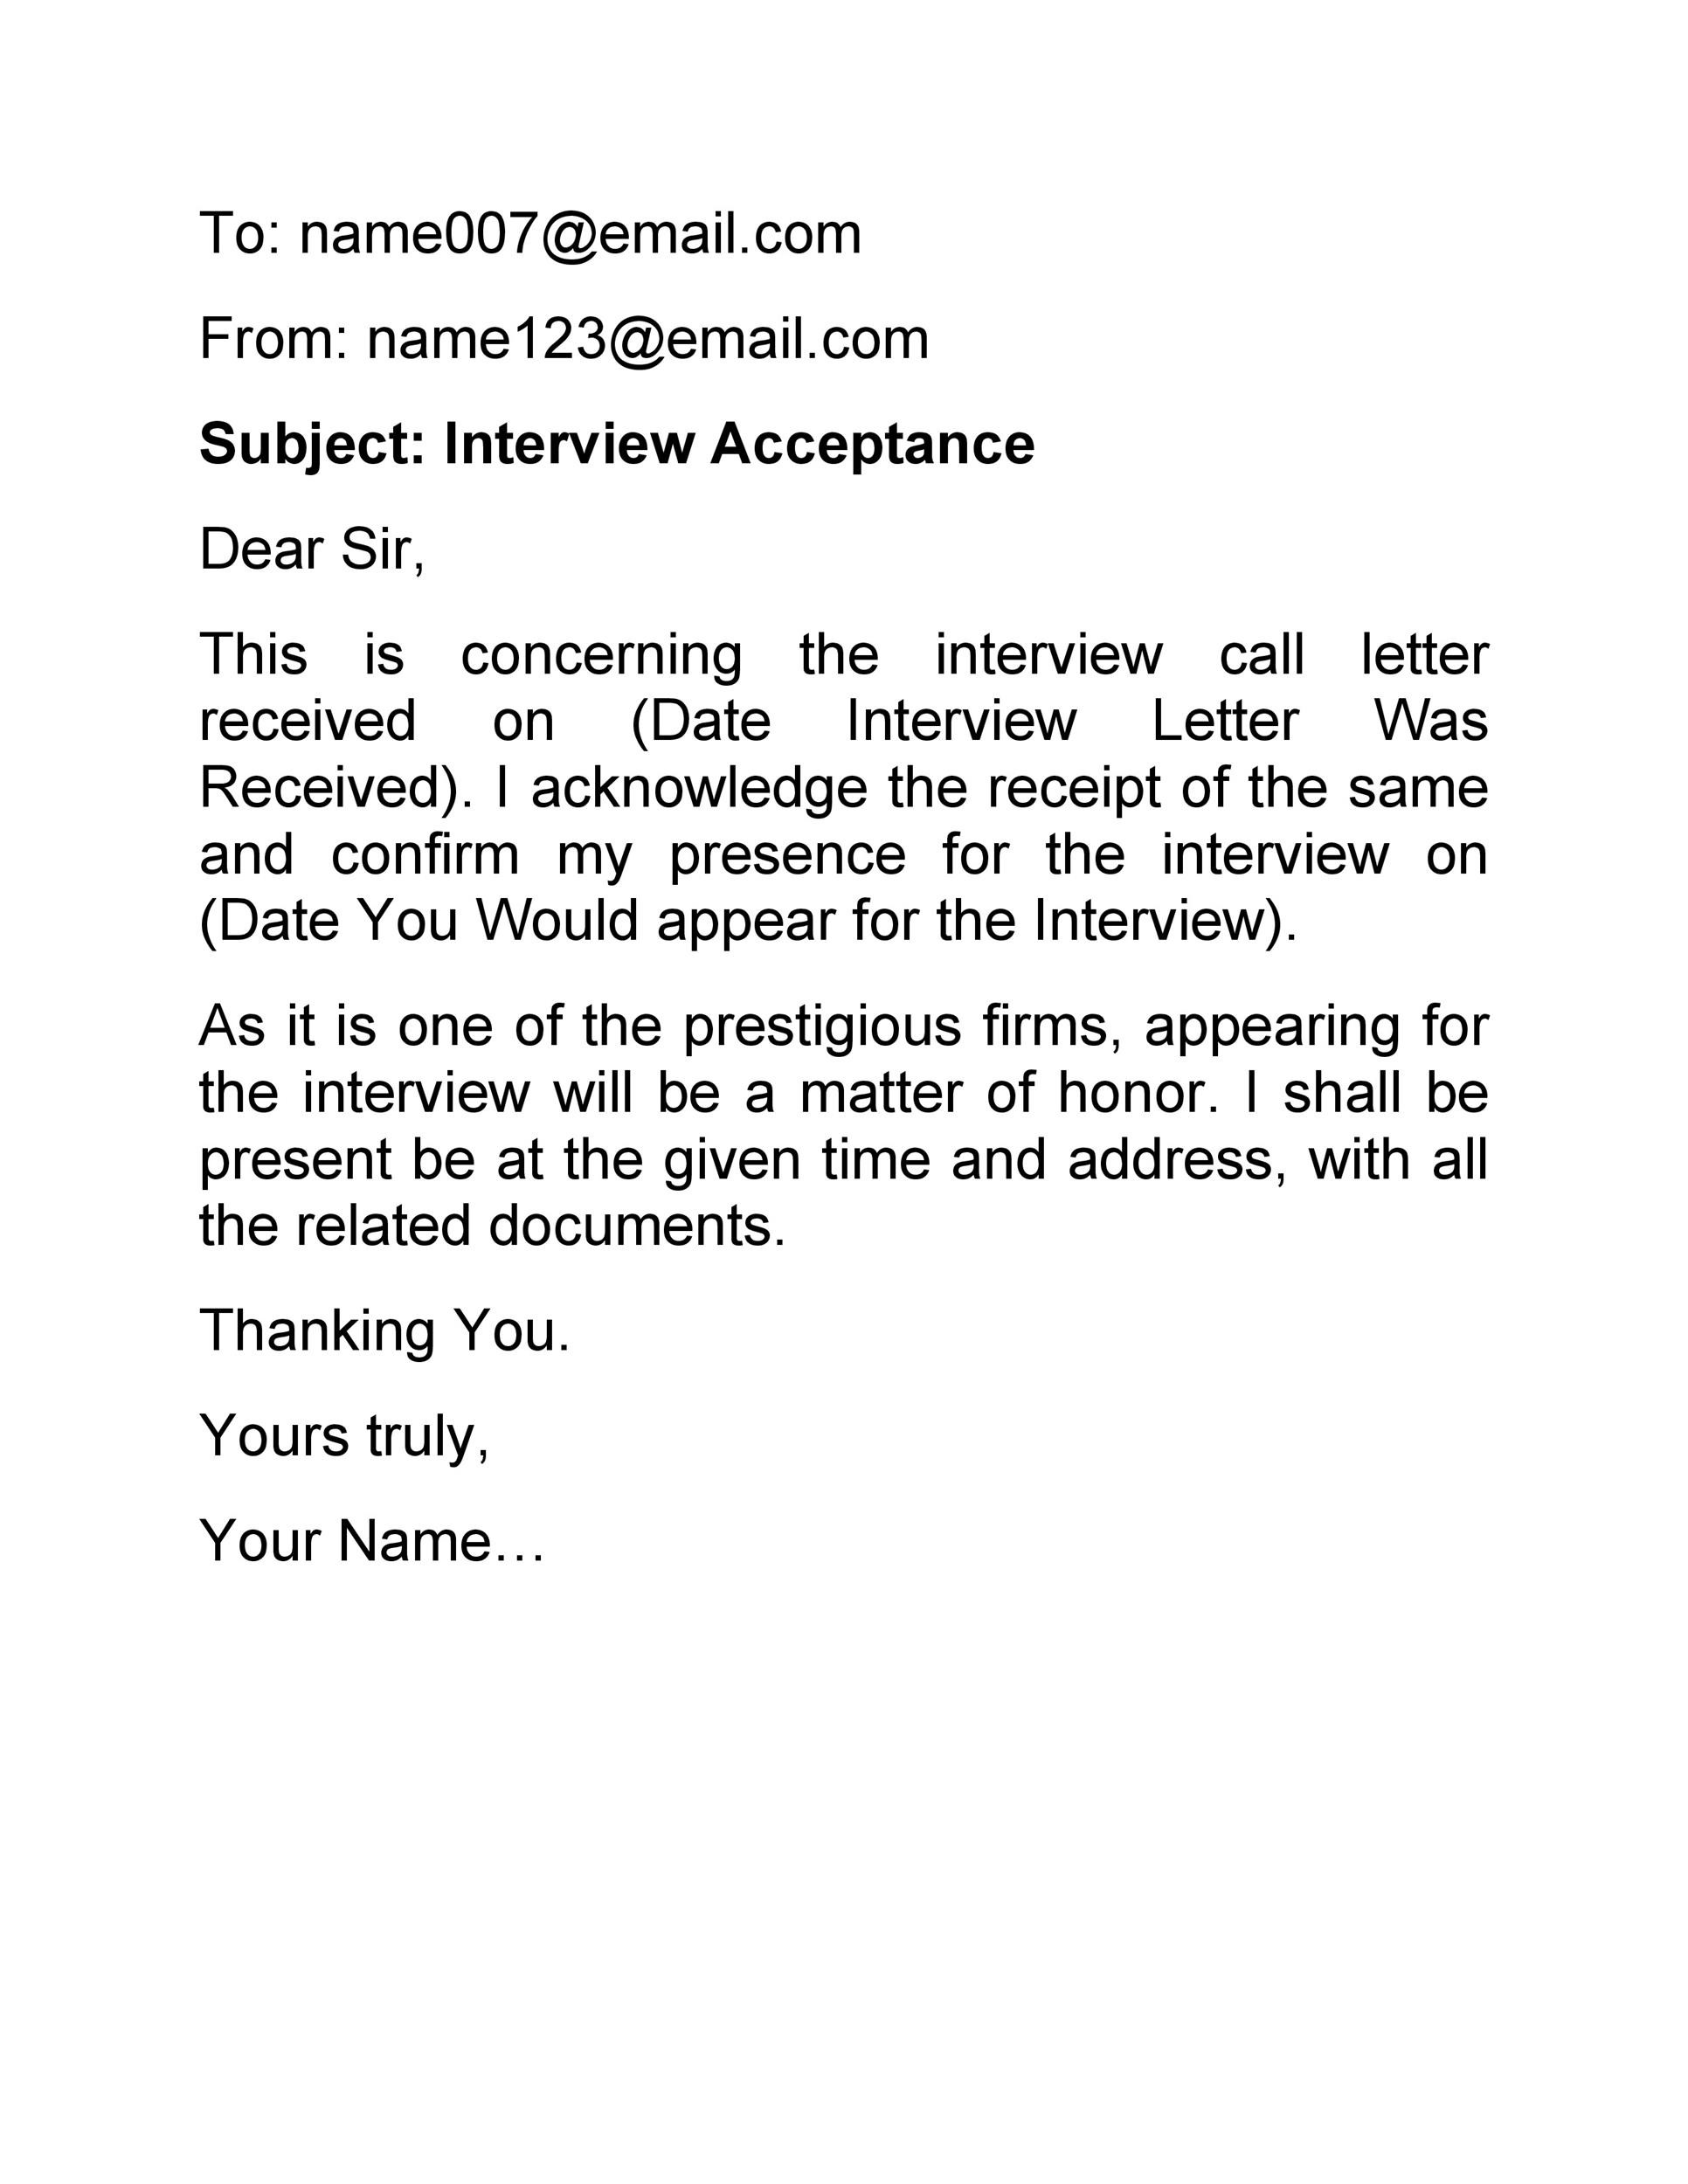 application letter for research interviewer